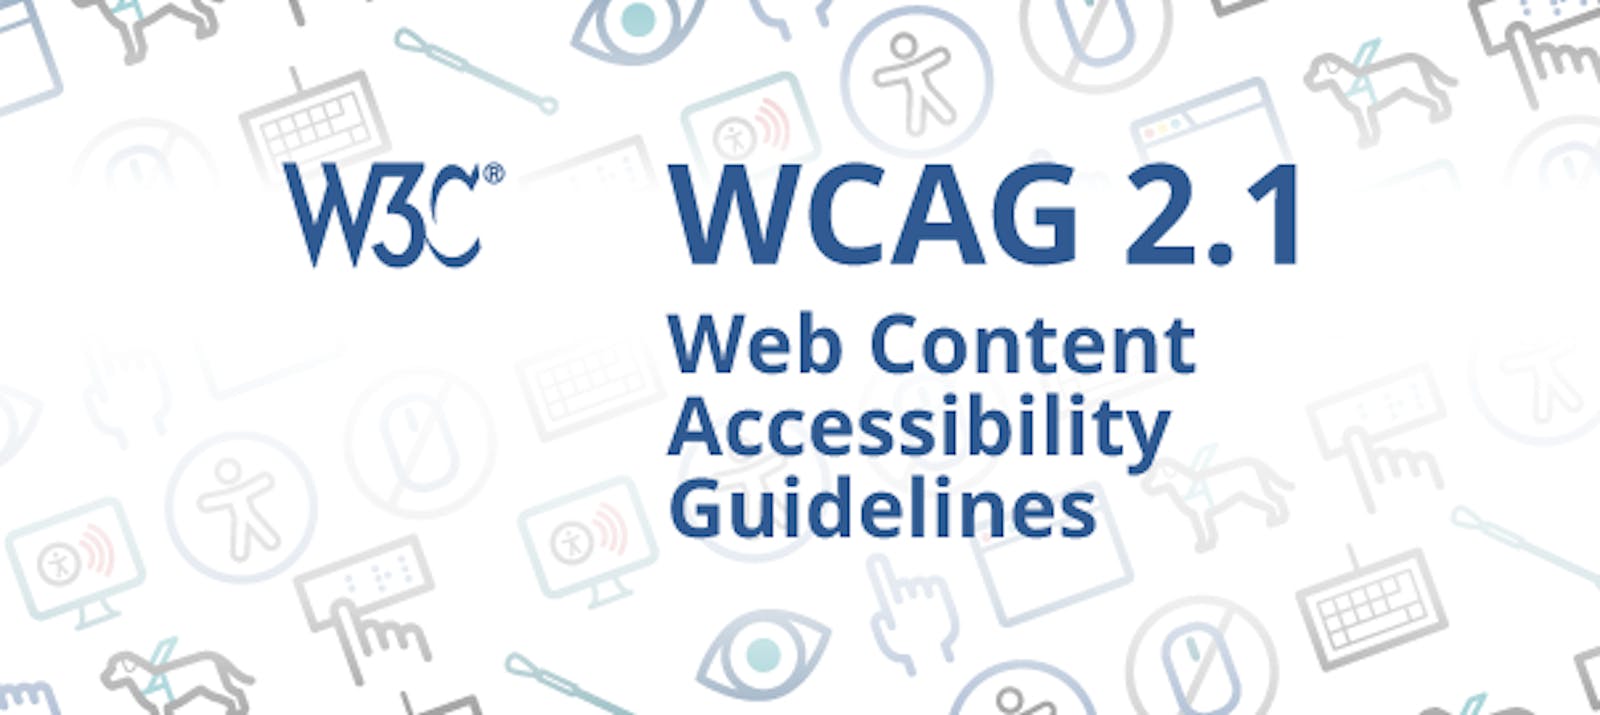 InclusiveDocs is WCAG 2.1 AA Compliant! What Does This Mean?